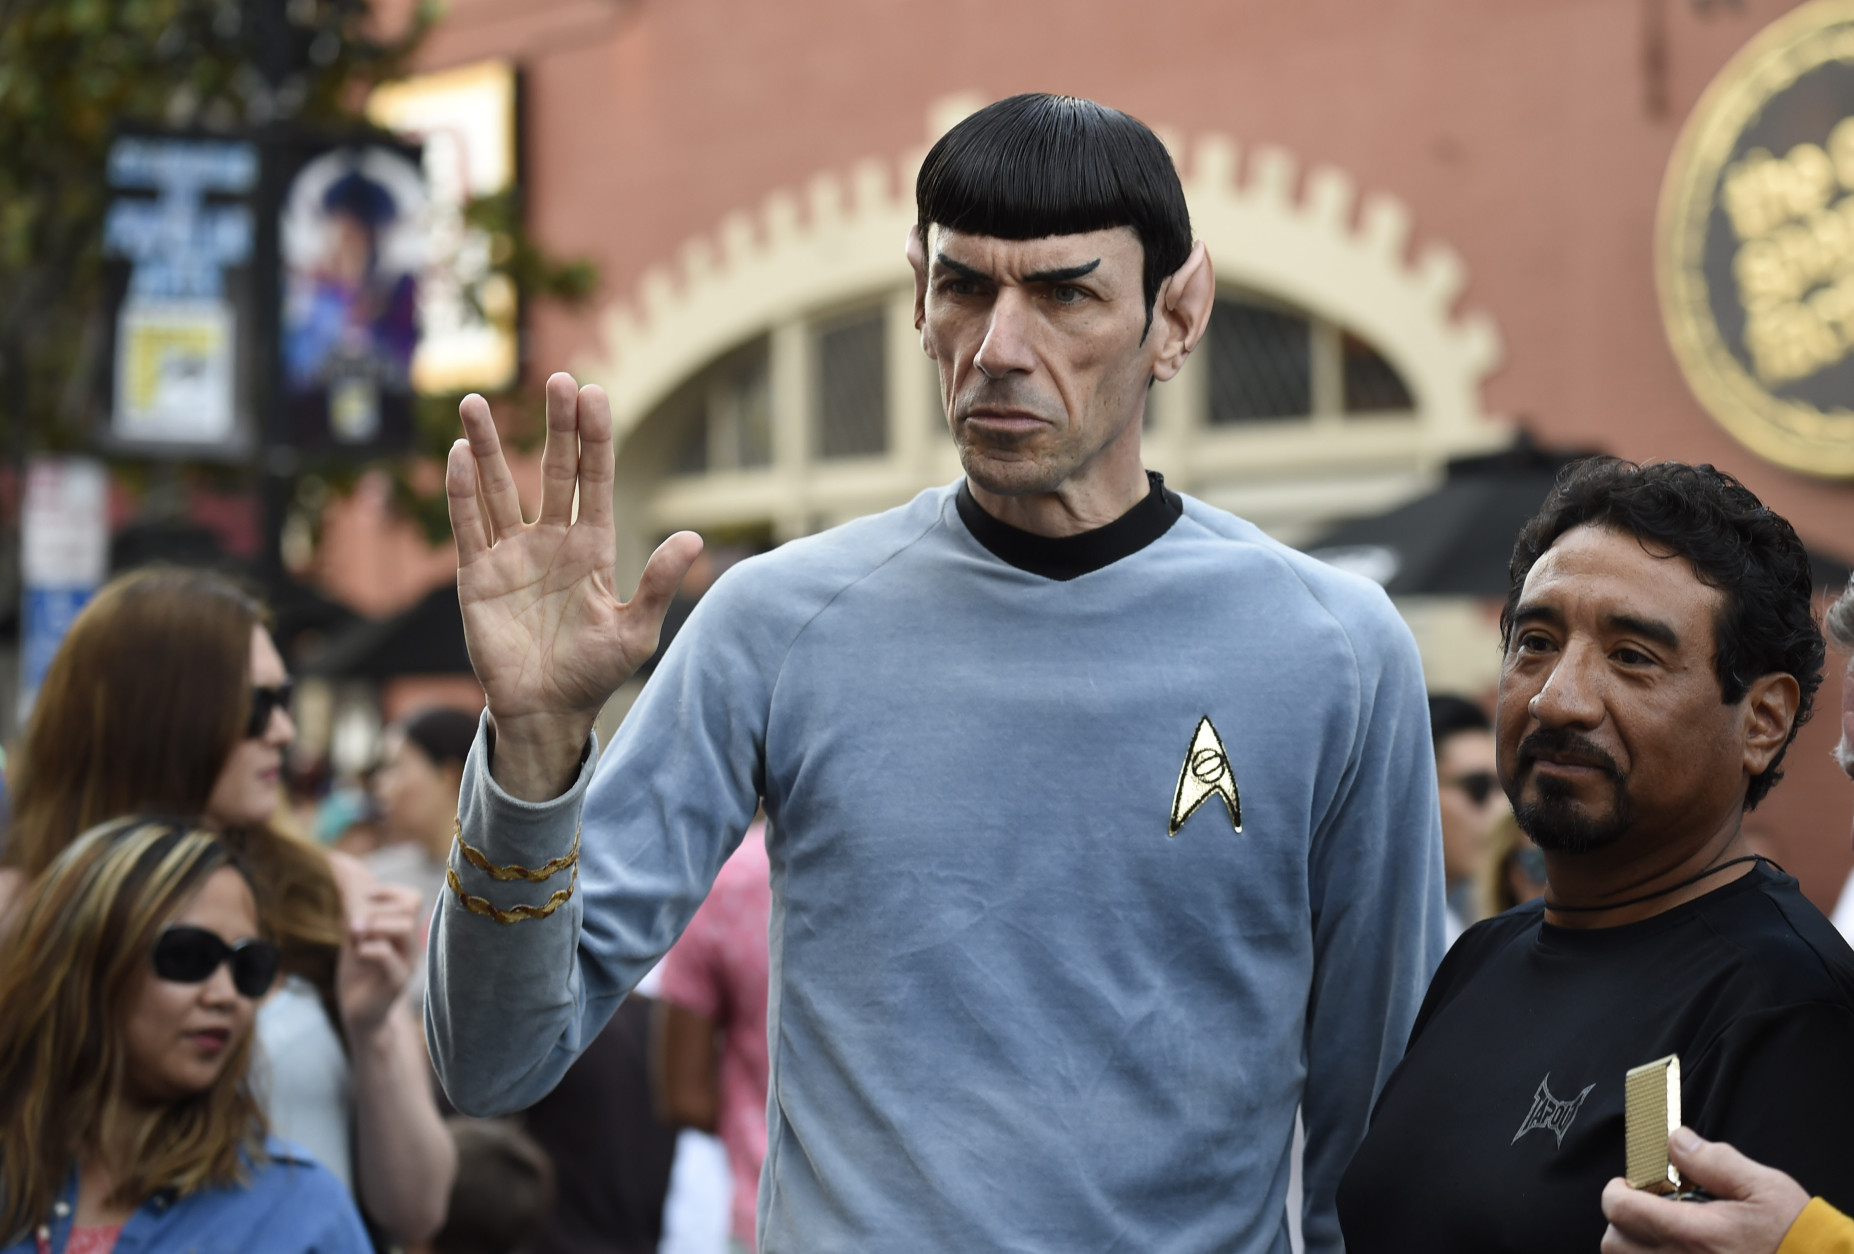 Spock Vegas dressed as Star Trek's Mr. Spock poses for the crowds in the street on day three of the Comic-Con International held at the San Diego Convention Center Saturday July 23, 2016 in San Diego.  (Photo by Denis Poroy/Invision/AP)